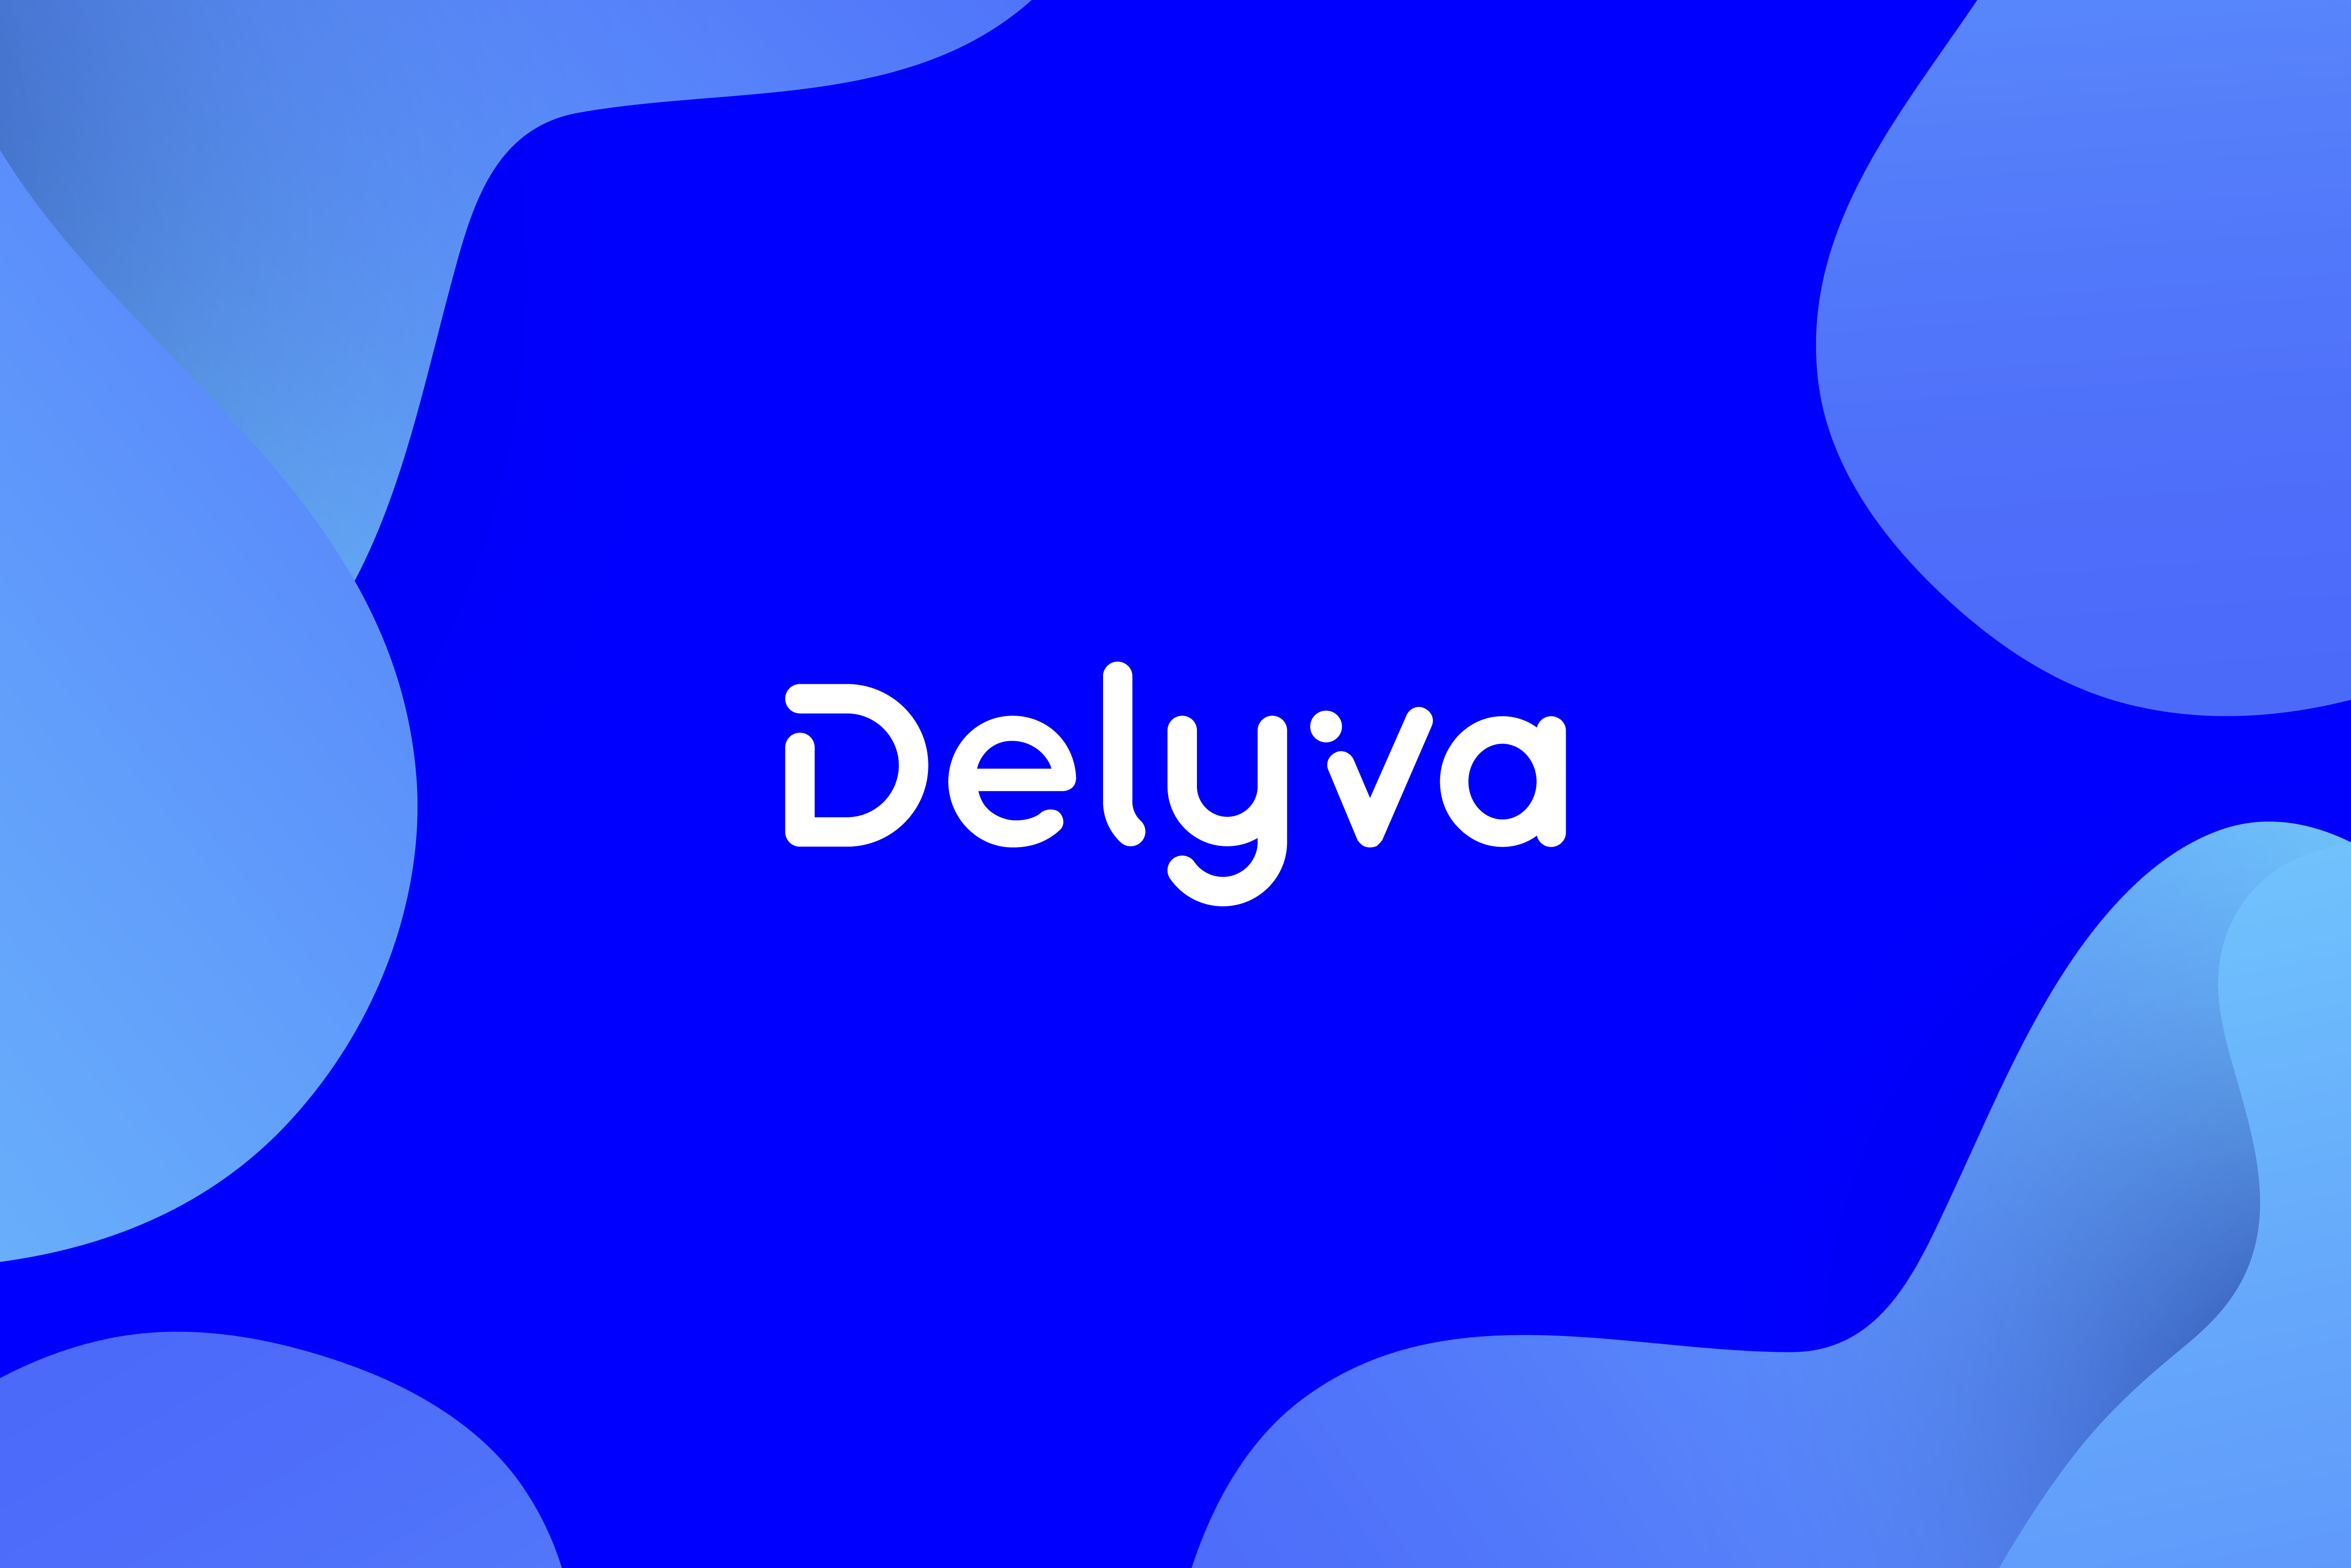 delyva logo with a patterned background